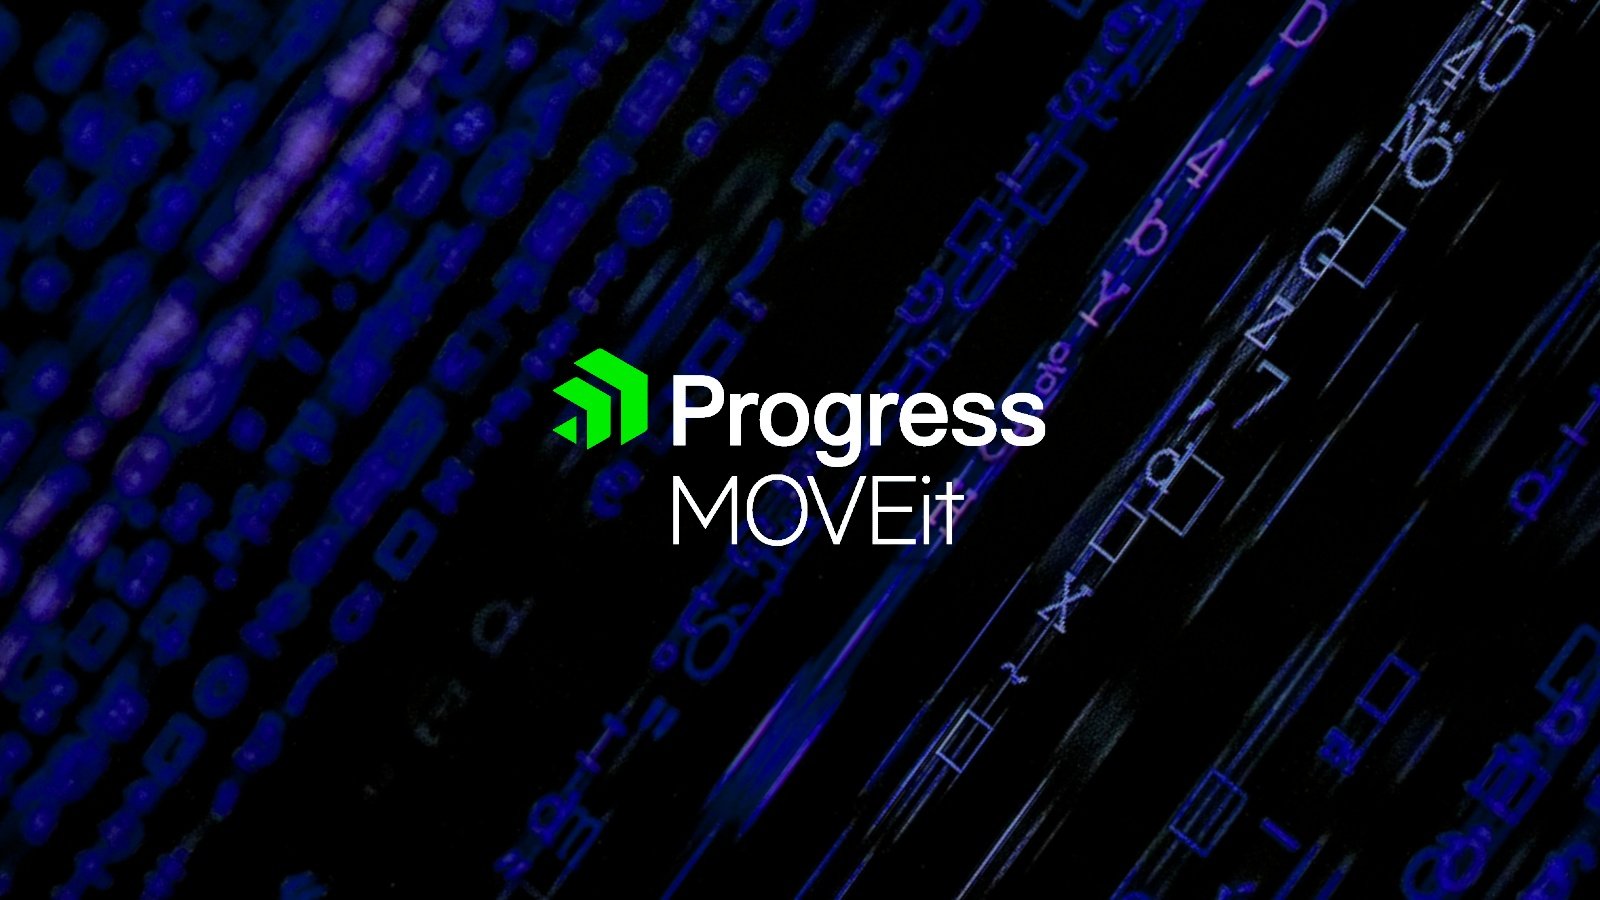 Progress movet logo with cloud integration and network management on a dark background.